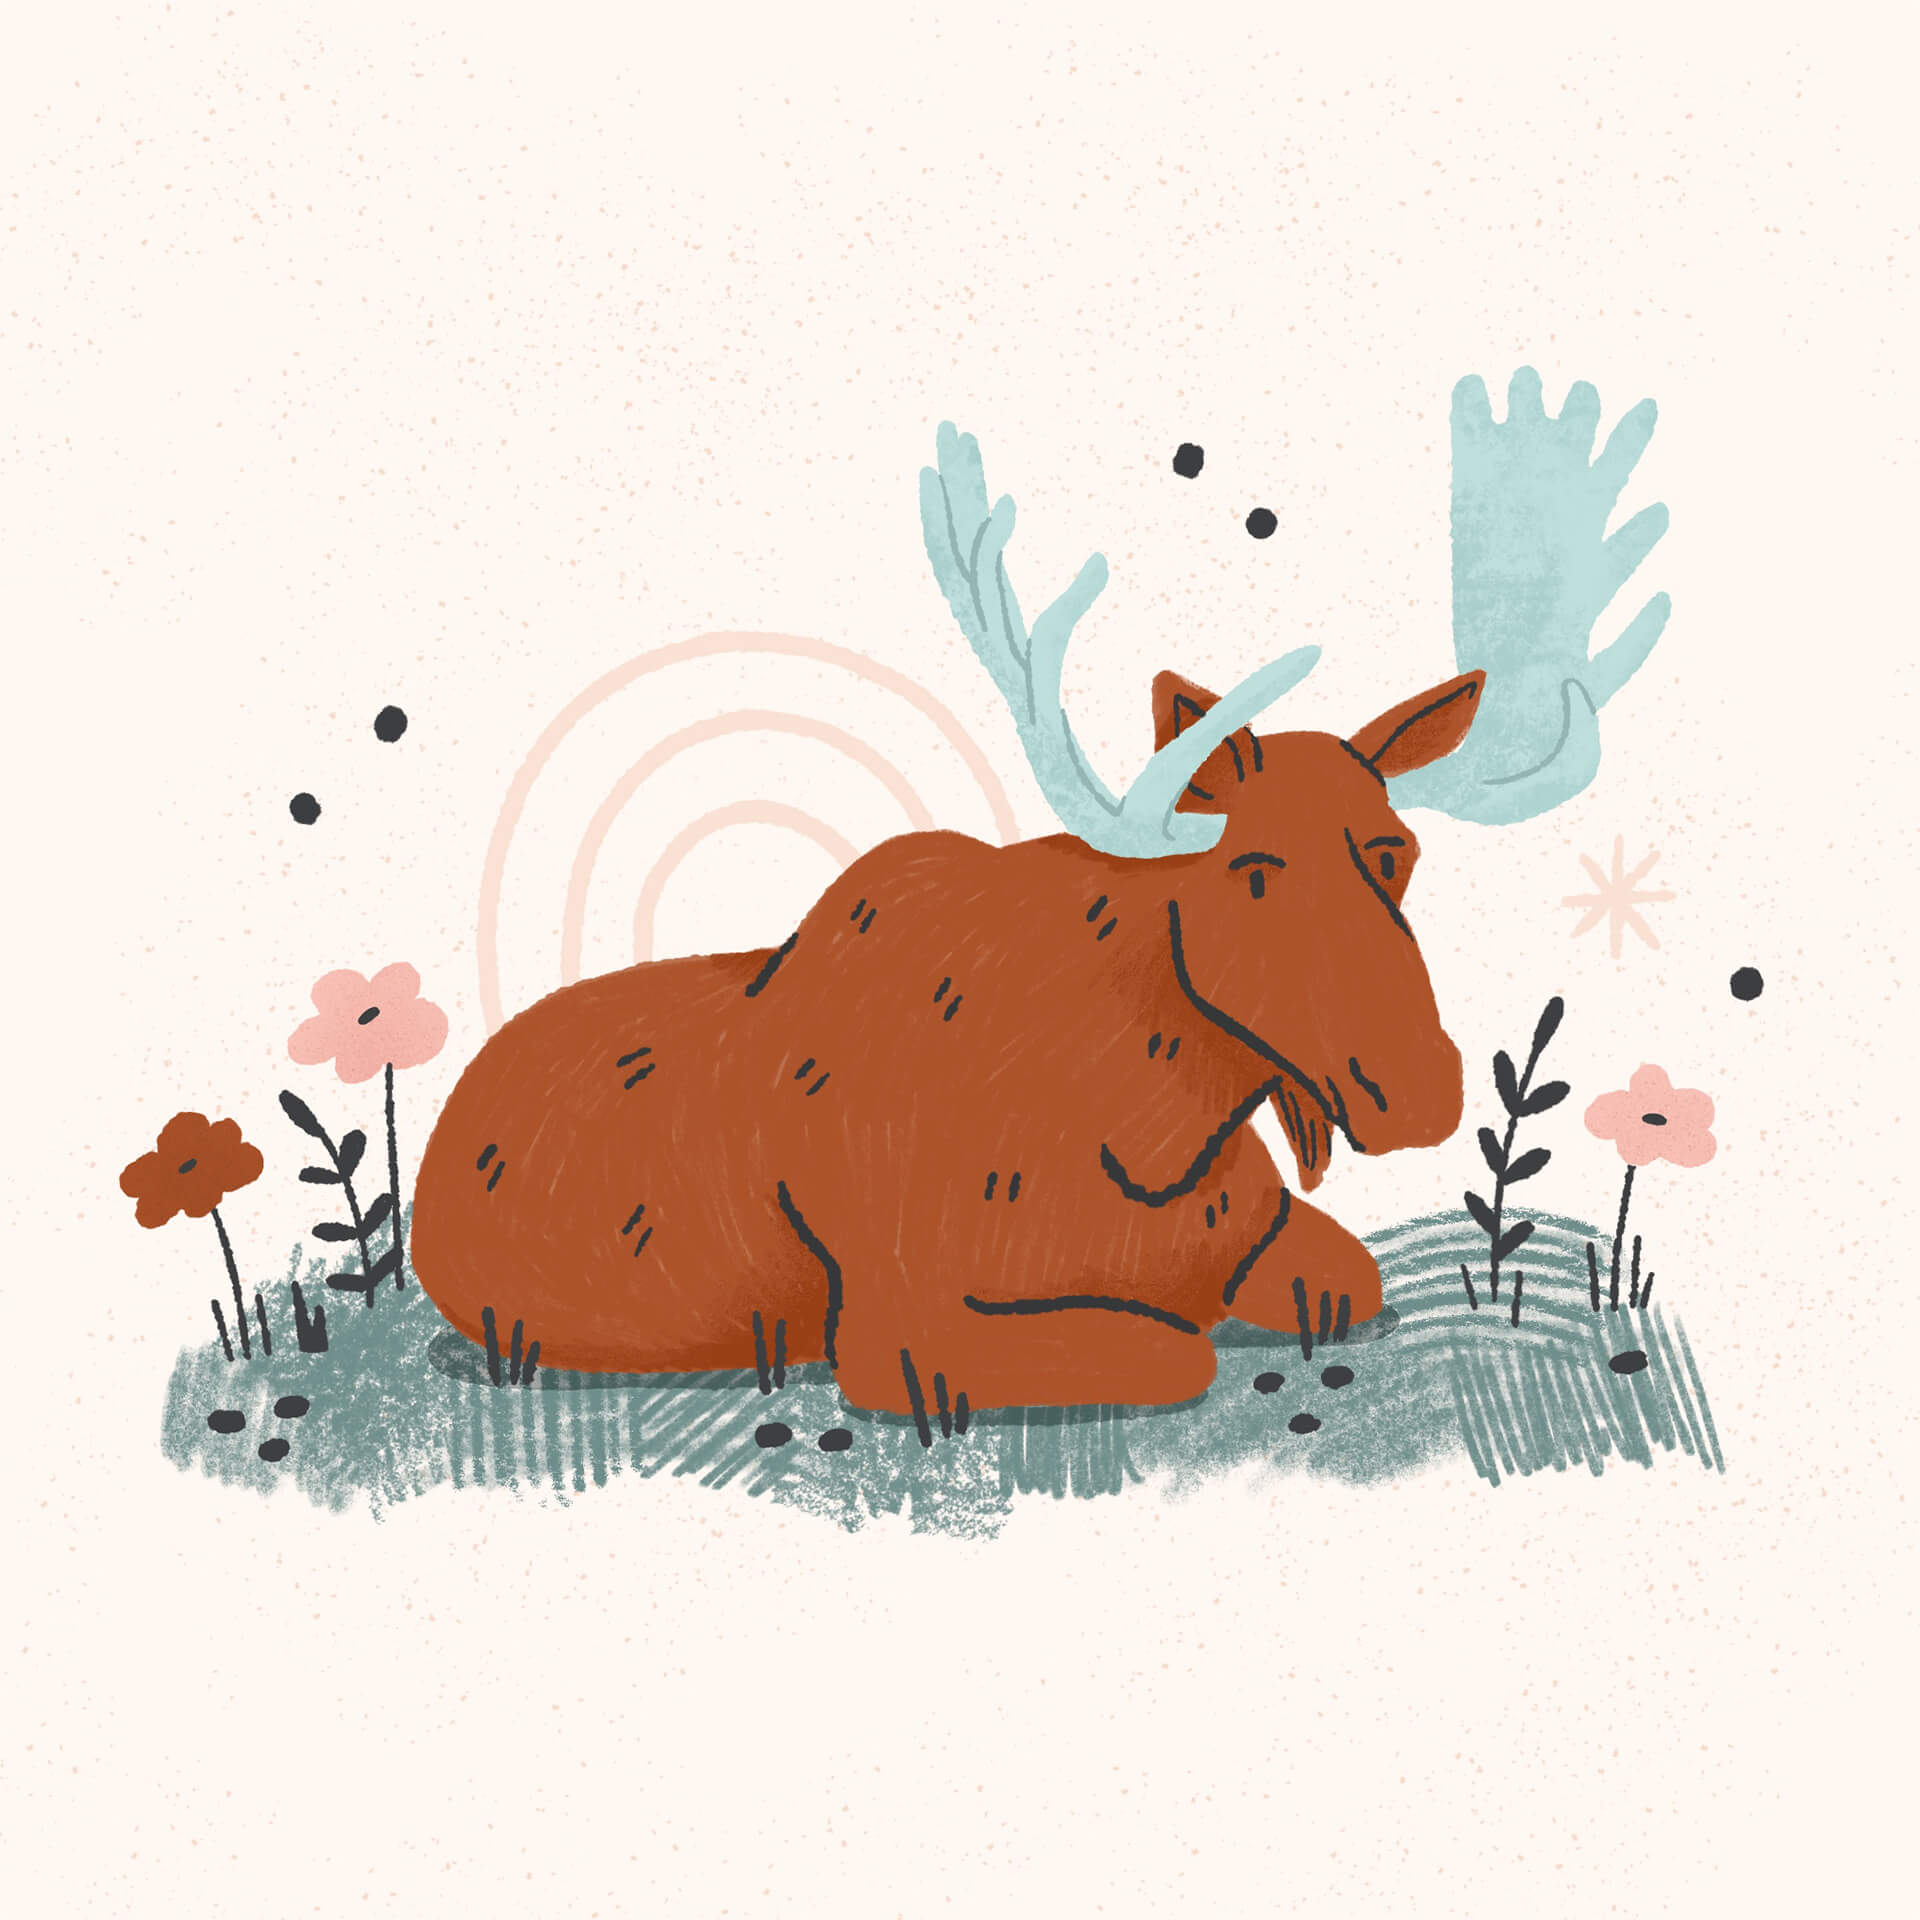 An illustration of an orange moose with blue antlers resting amid some plants and flowers